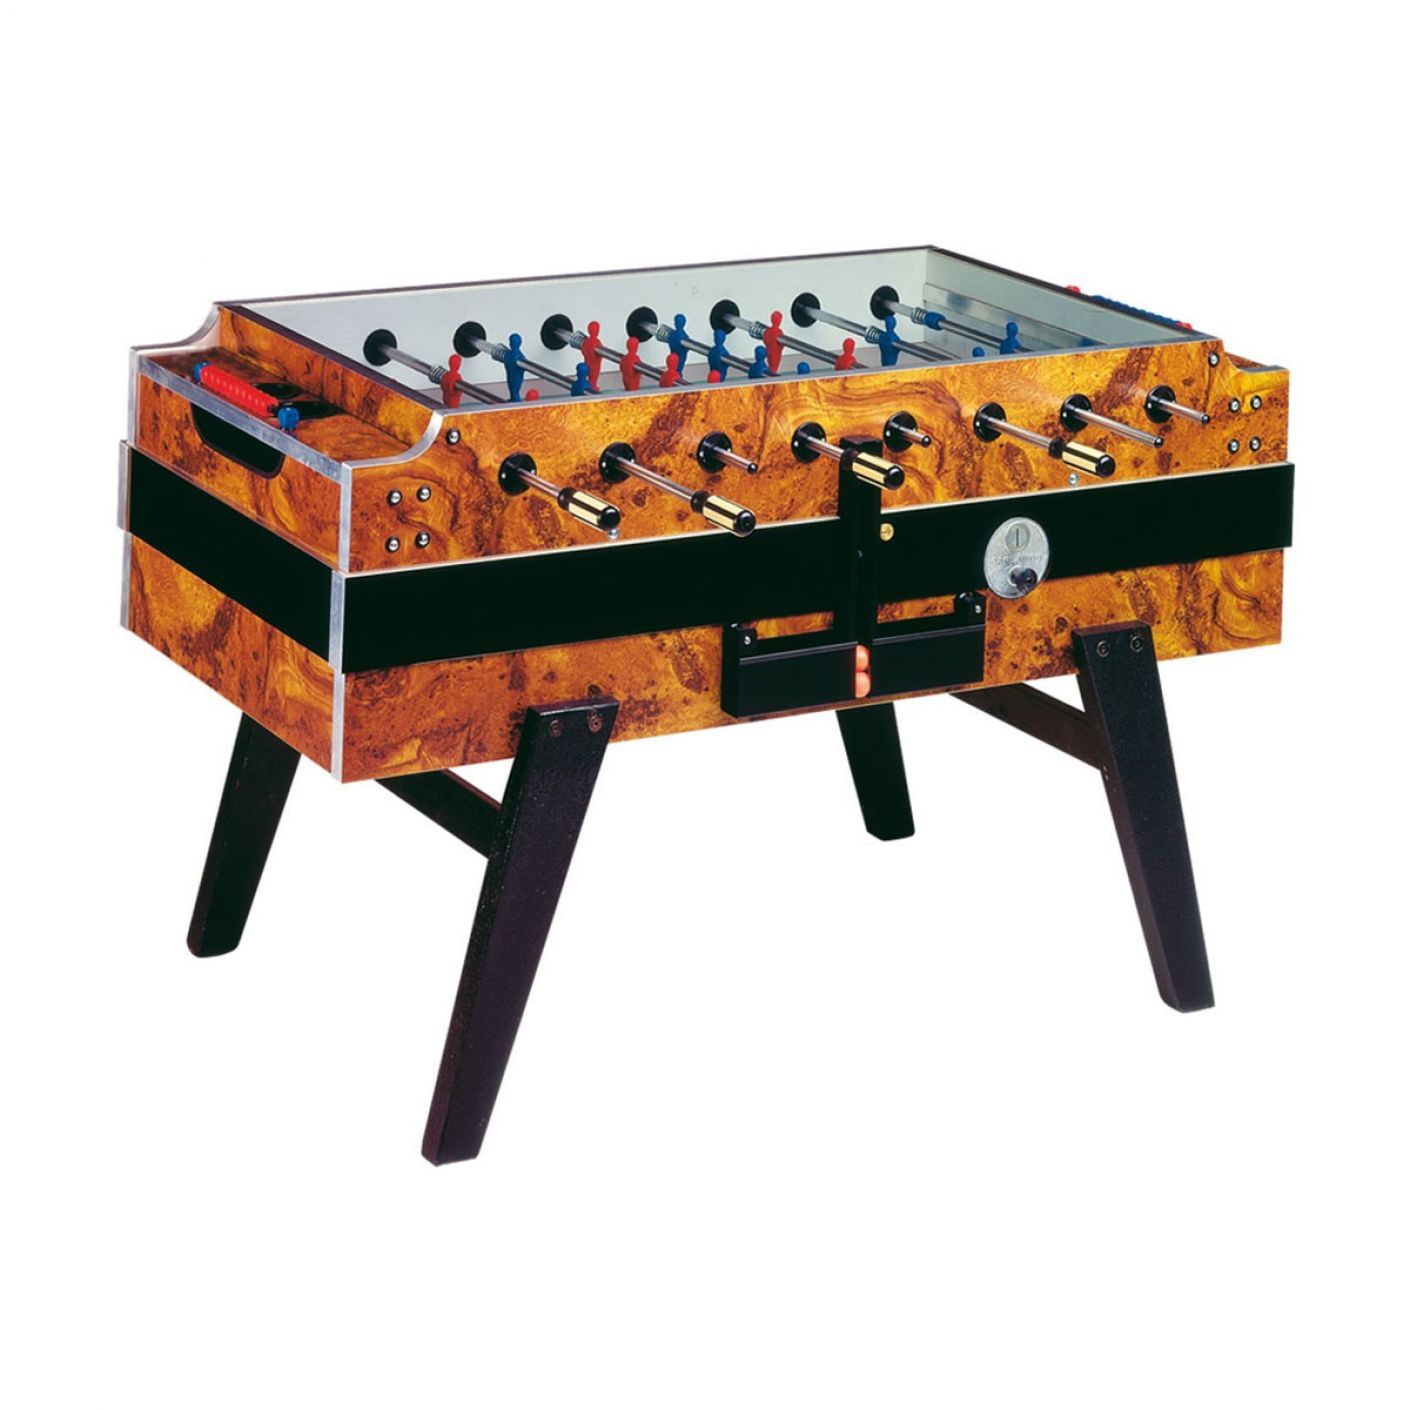 Garlando Soccer Table Covered with outgoing rods